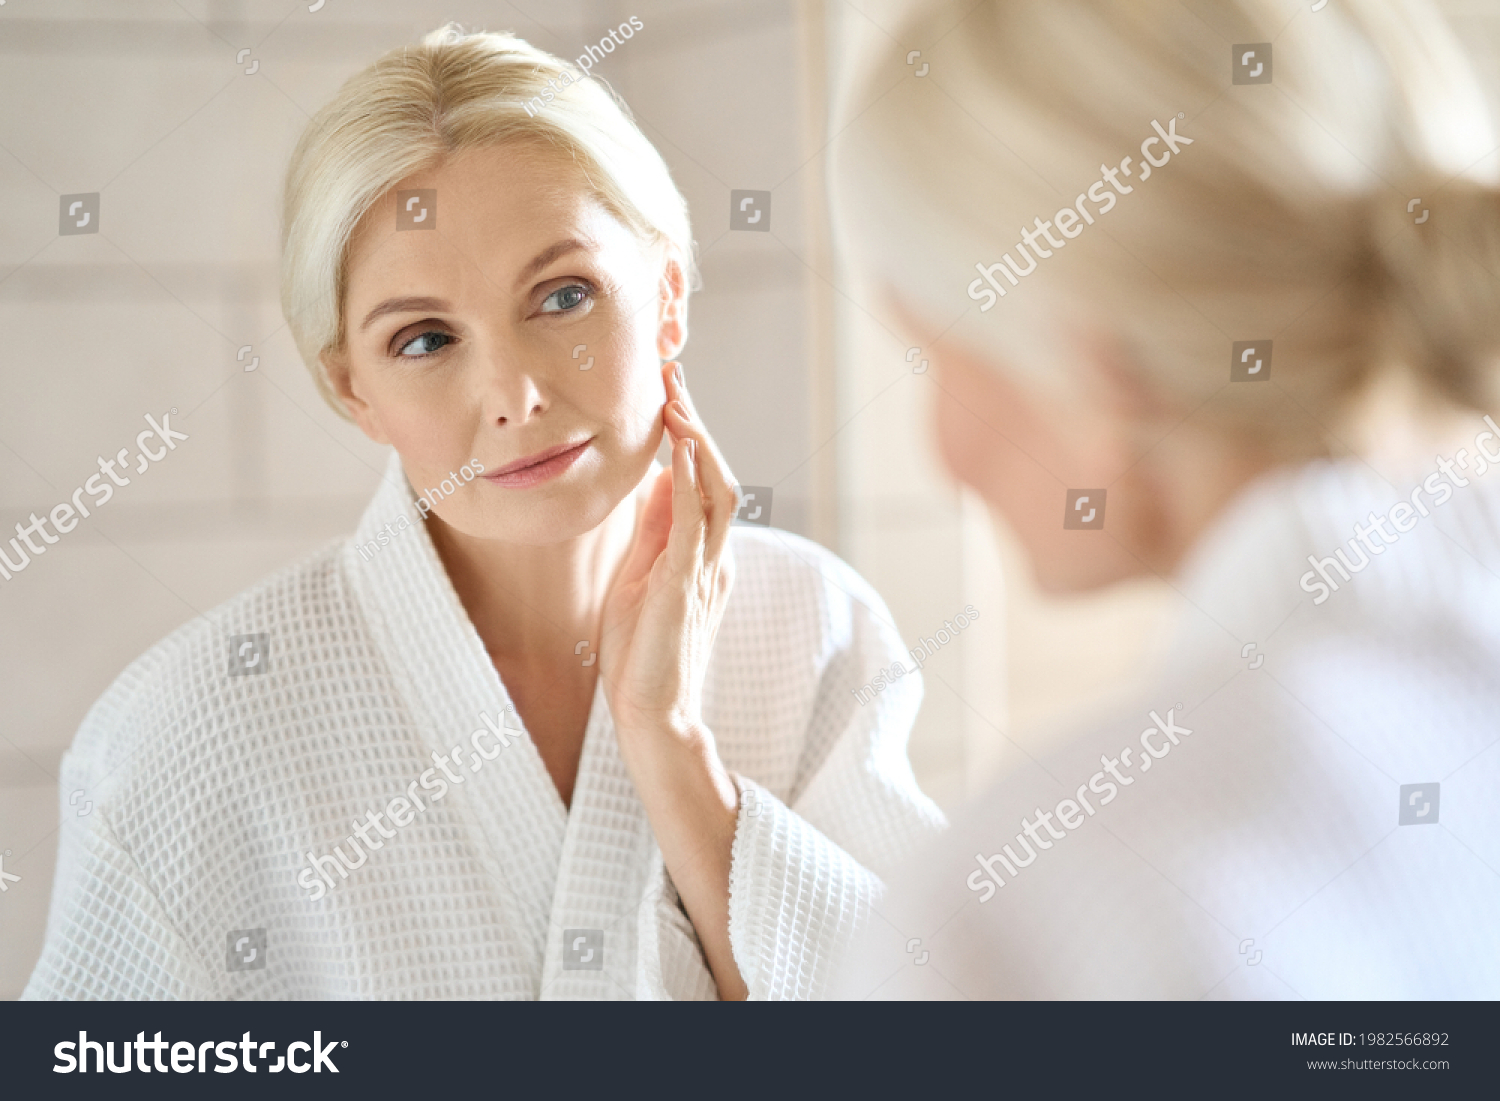 Headshot of gorgeous mid age adult 50 years old blonde woman standing in bathroom after shower touching face, looking at reflection in mirror doing morning beauty routine. Older skin care concept. #1982566892